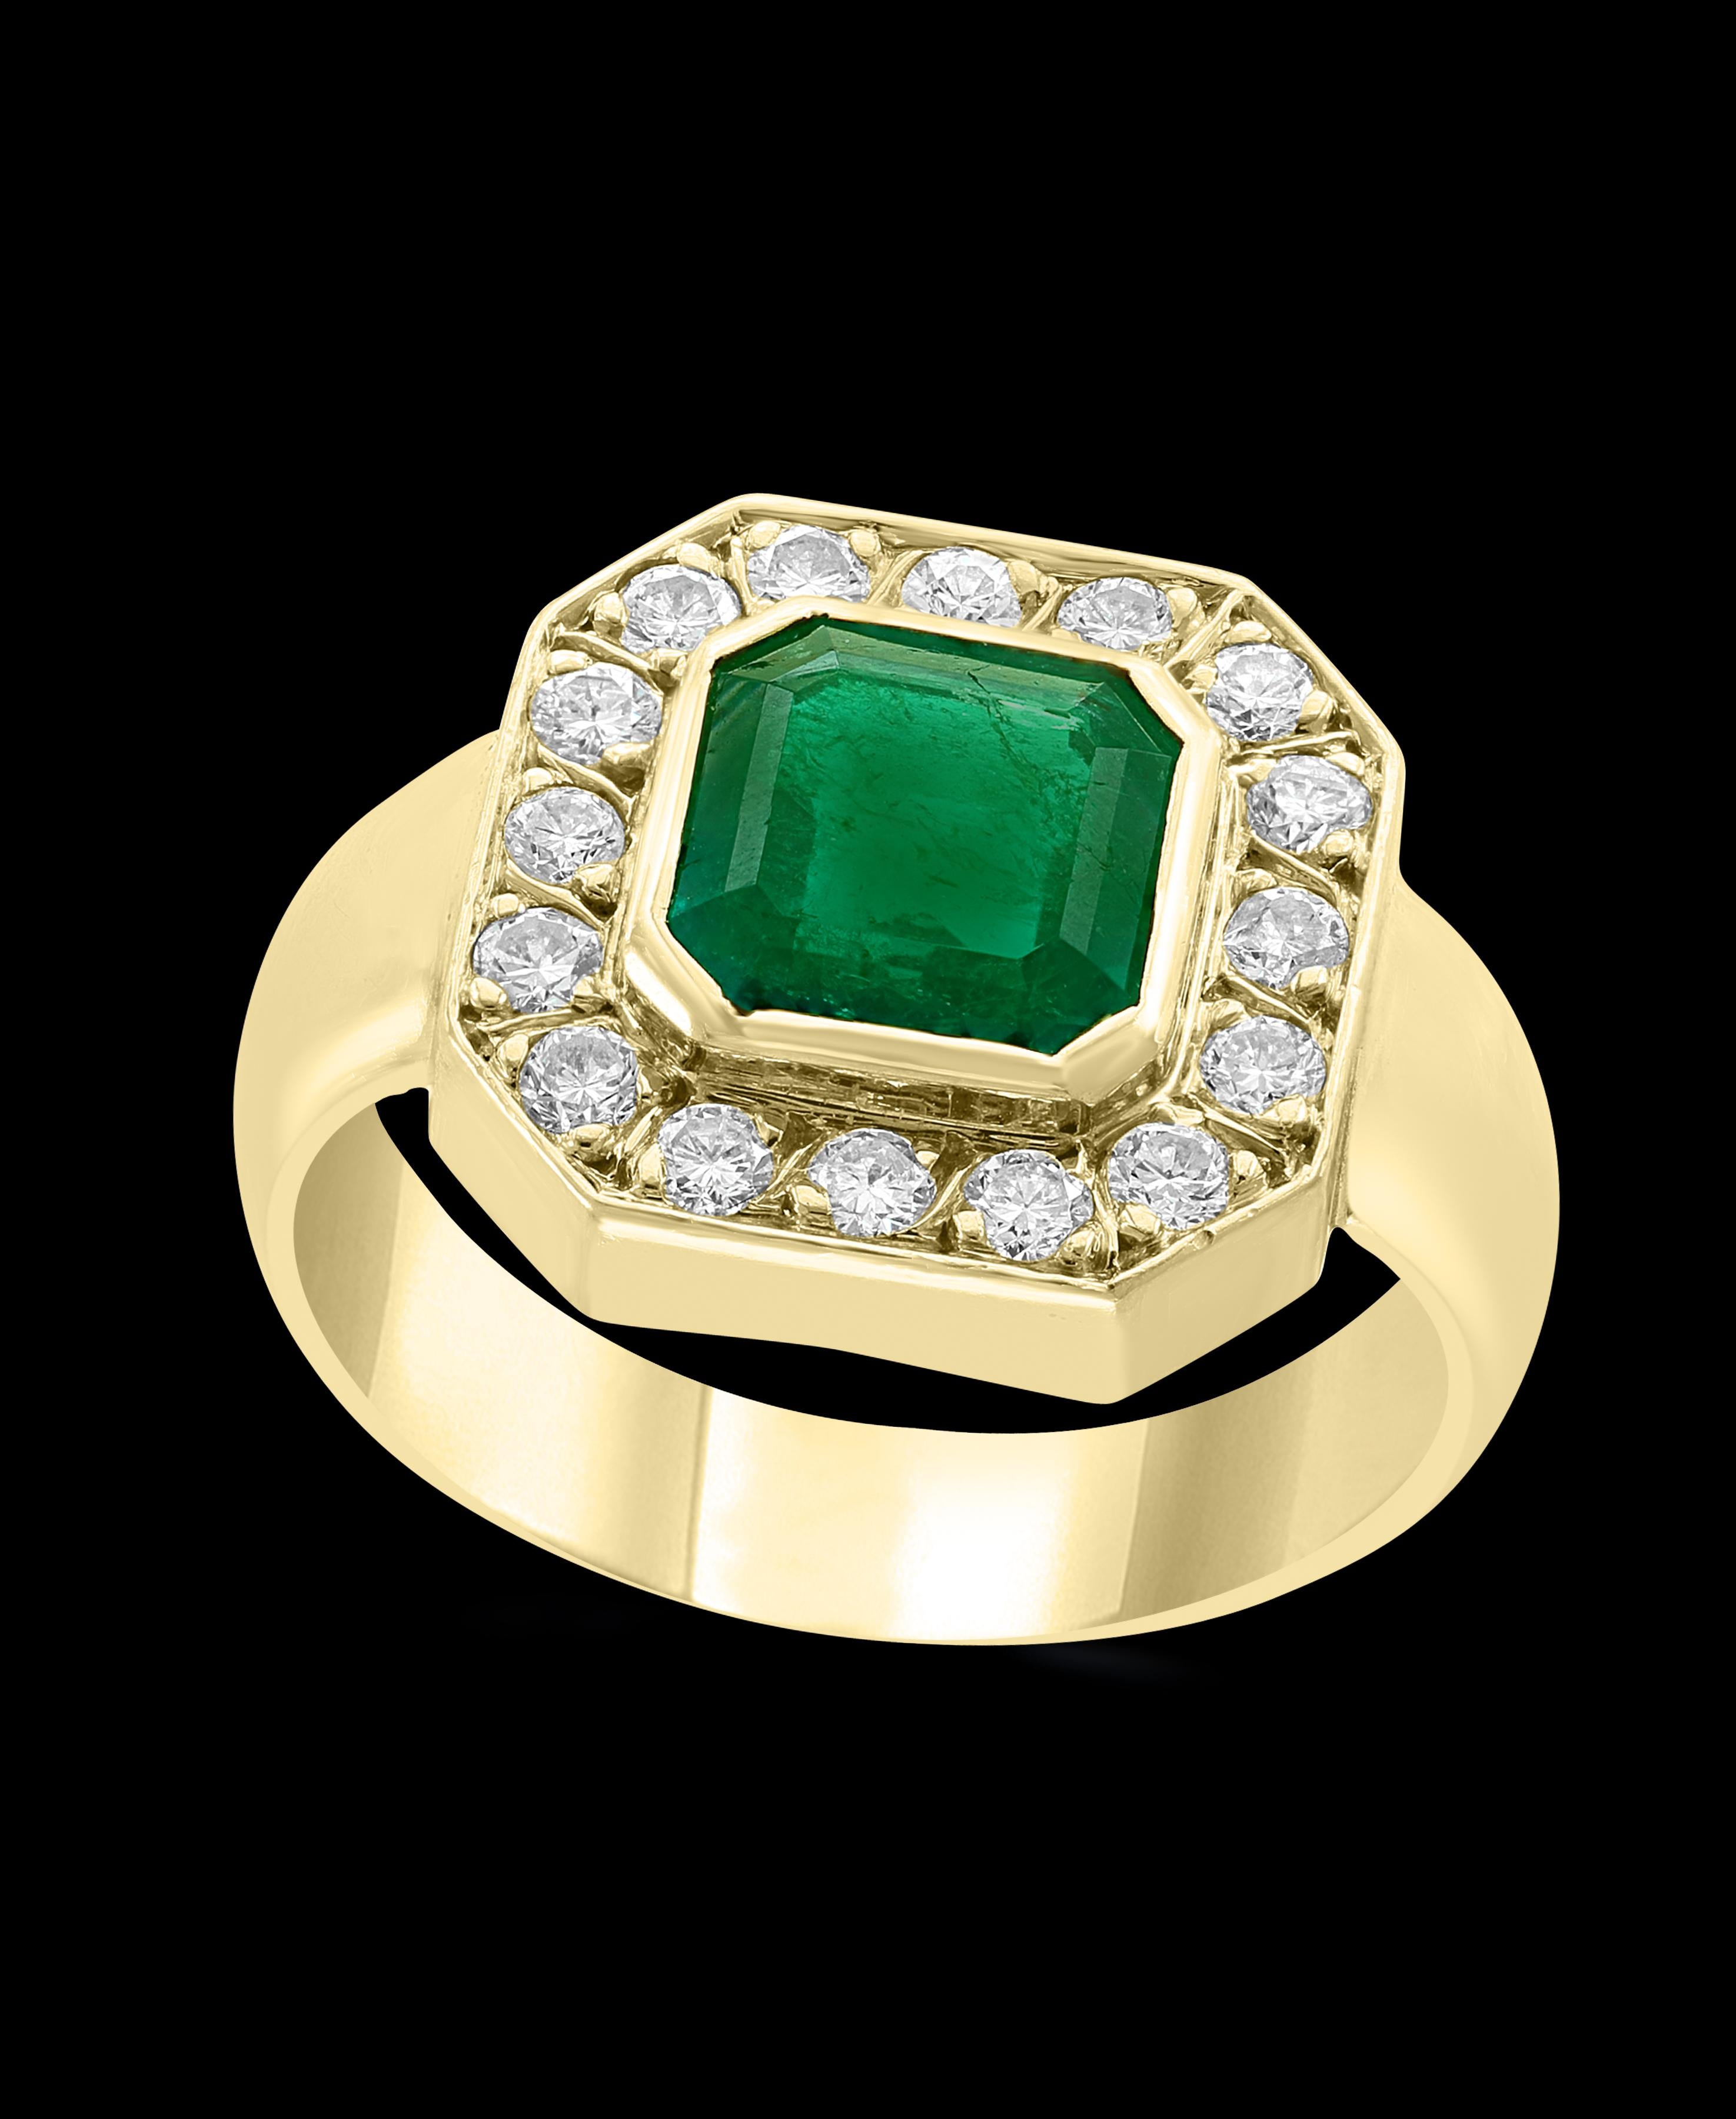 A classic, Unisex ring
AGL certified # 1098786
Approximately 2.25 Carat  Colombian Emerald and Diamond Ring, Estate with no color enhancement.
Natural Beryl
Emerald
 Origin: Colombia
Clarity enhancement : Minor 
type : Traditional

 ( Natural